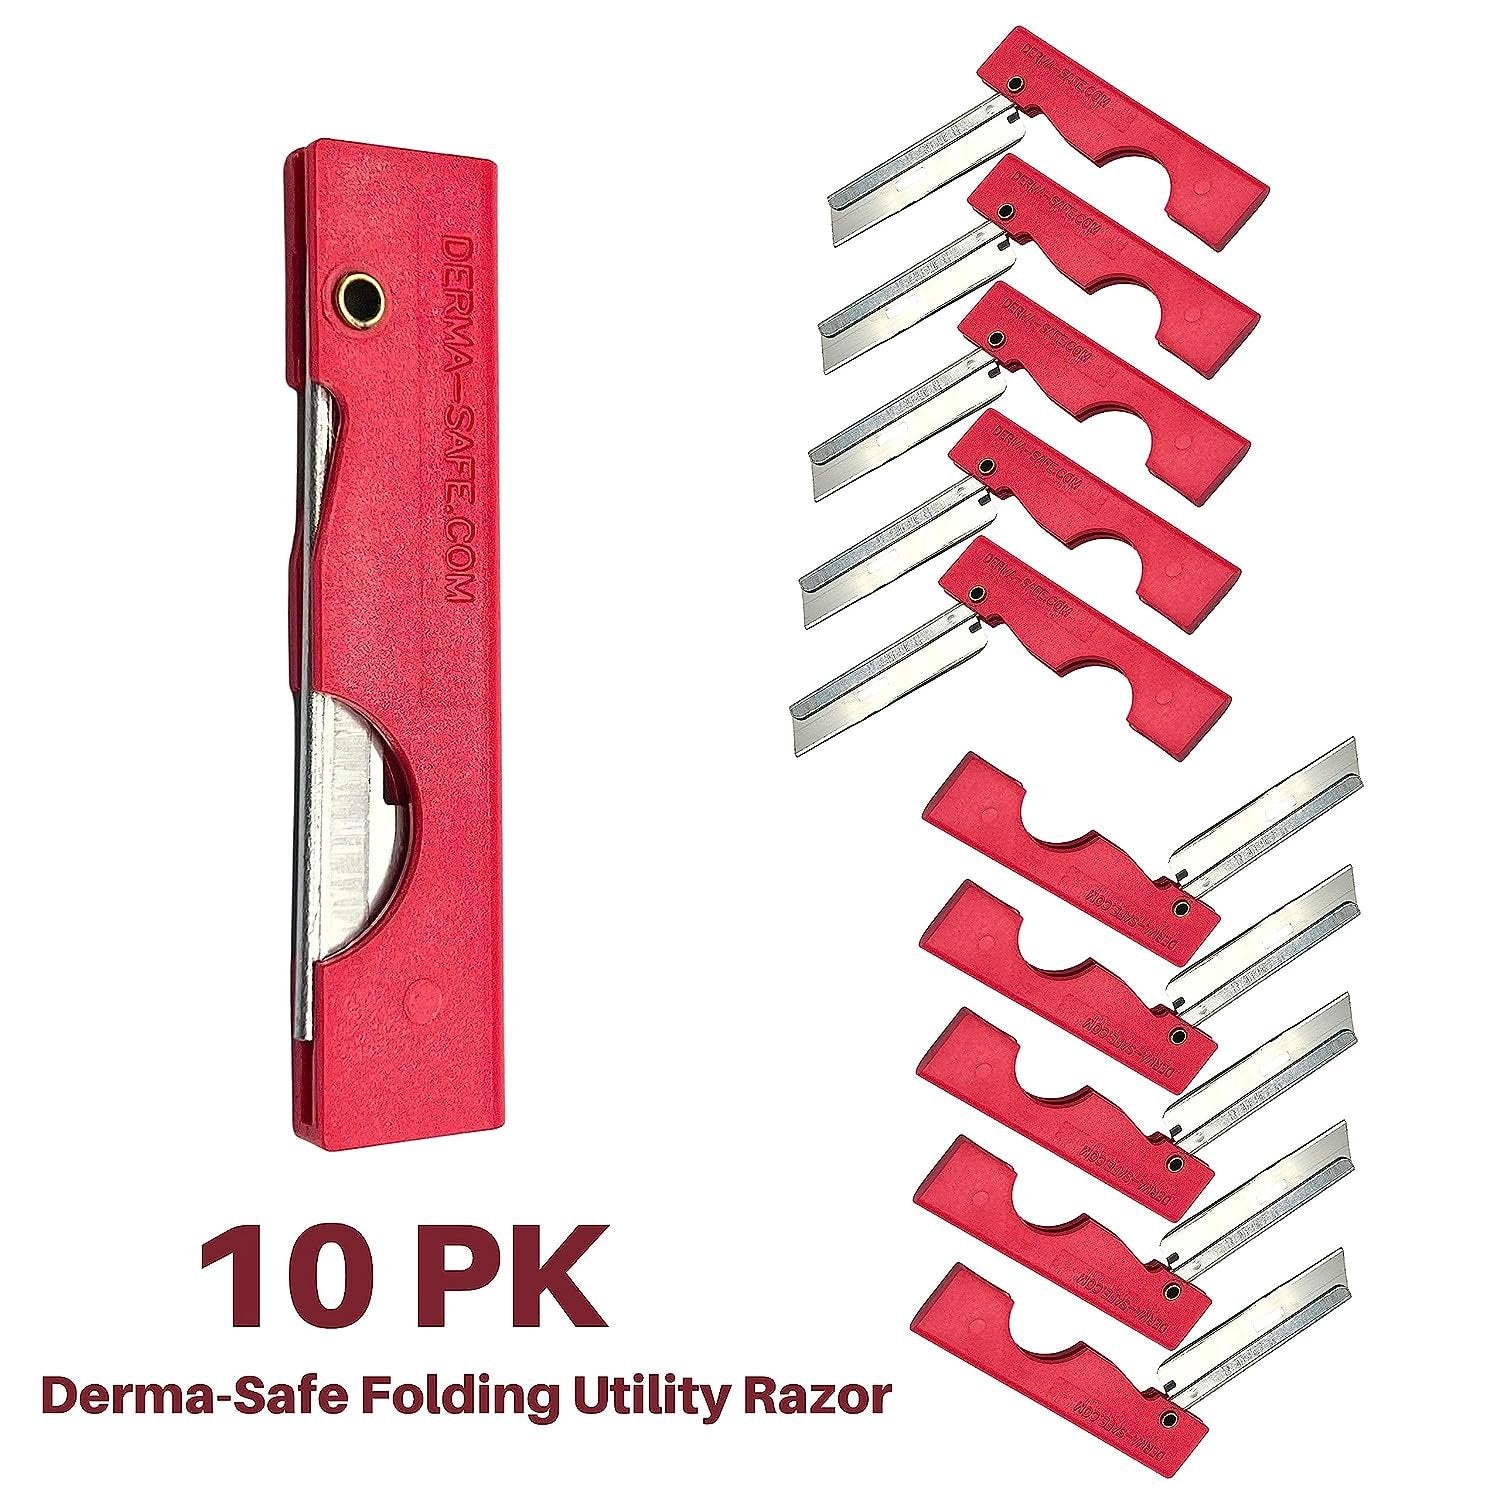 Derma-Safe Folding Utility Razor for Survival Utility and First Aid Kits - Mini Pocket Foldable Razor Blade, Folding Scalpel, (Red) 10-Pack